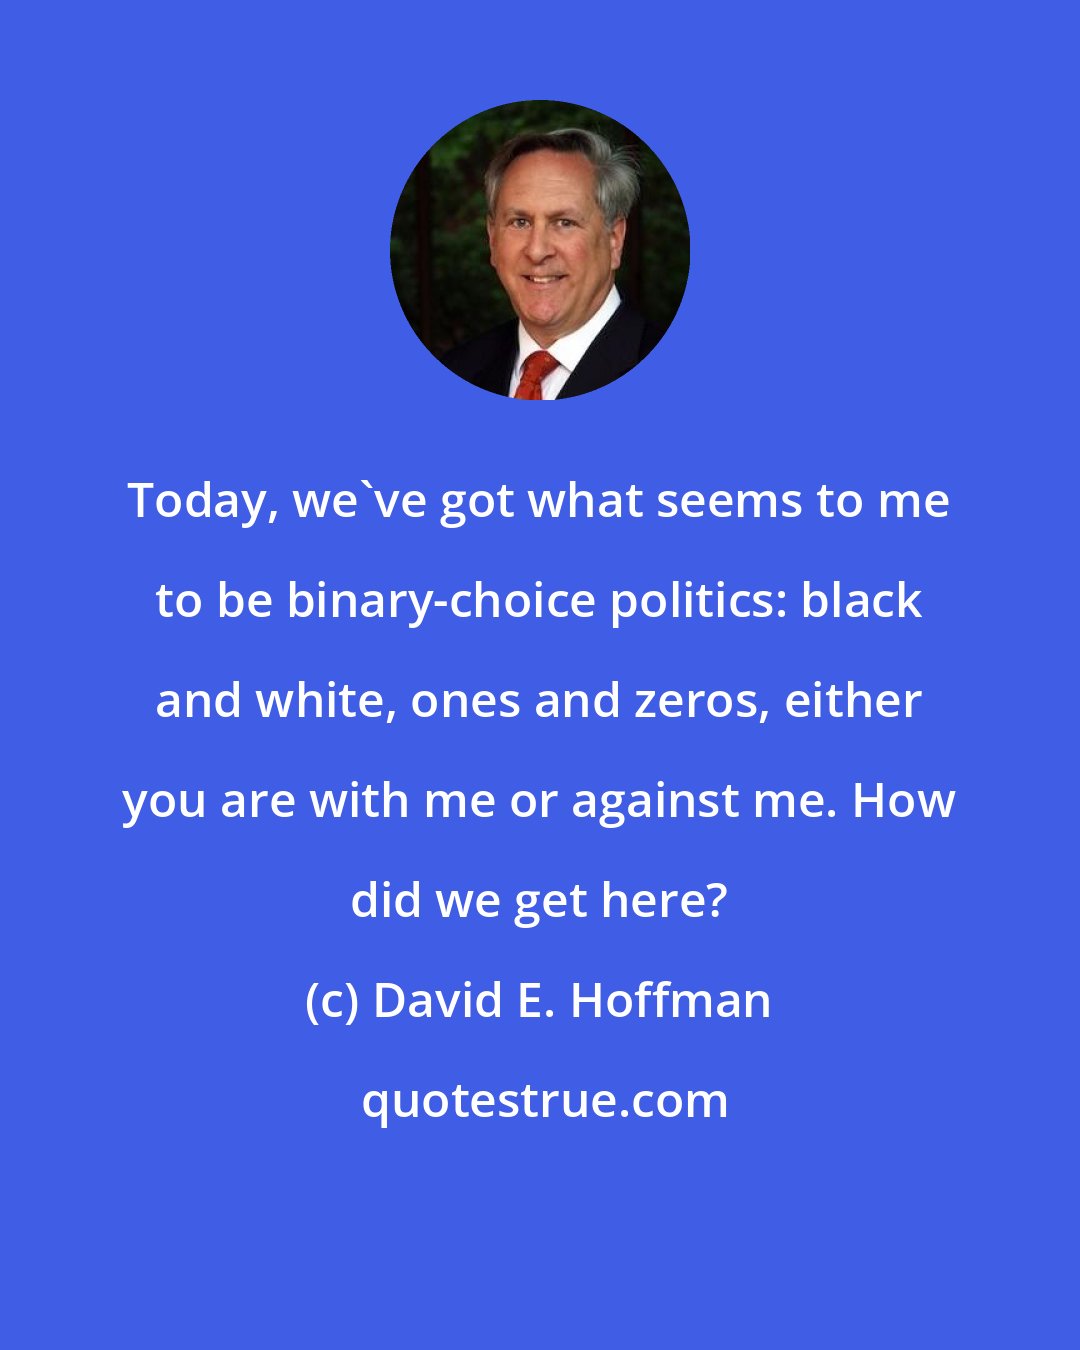 David E. Hoffman: Today, we've got what seems to me to be binary-choice politics: black and white, ones and zeros, either you are with me or against me. How did we get here?